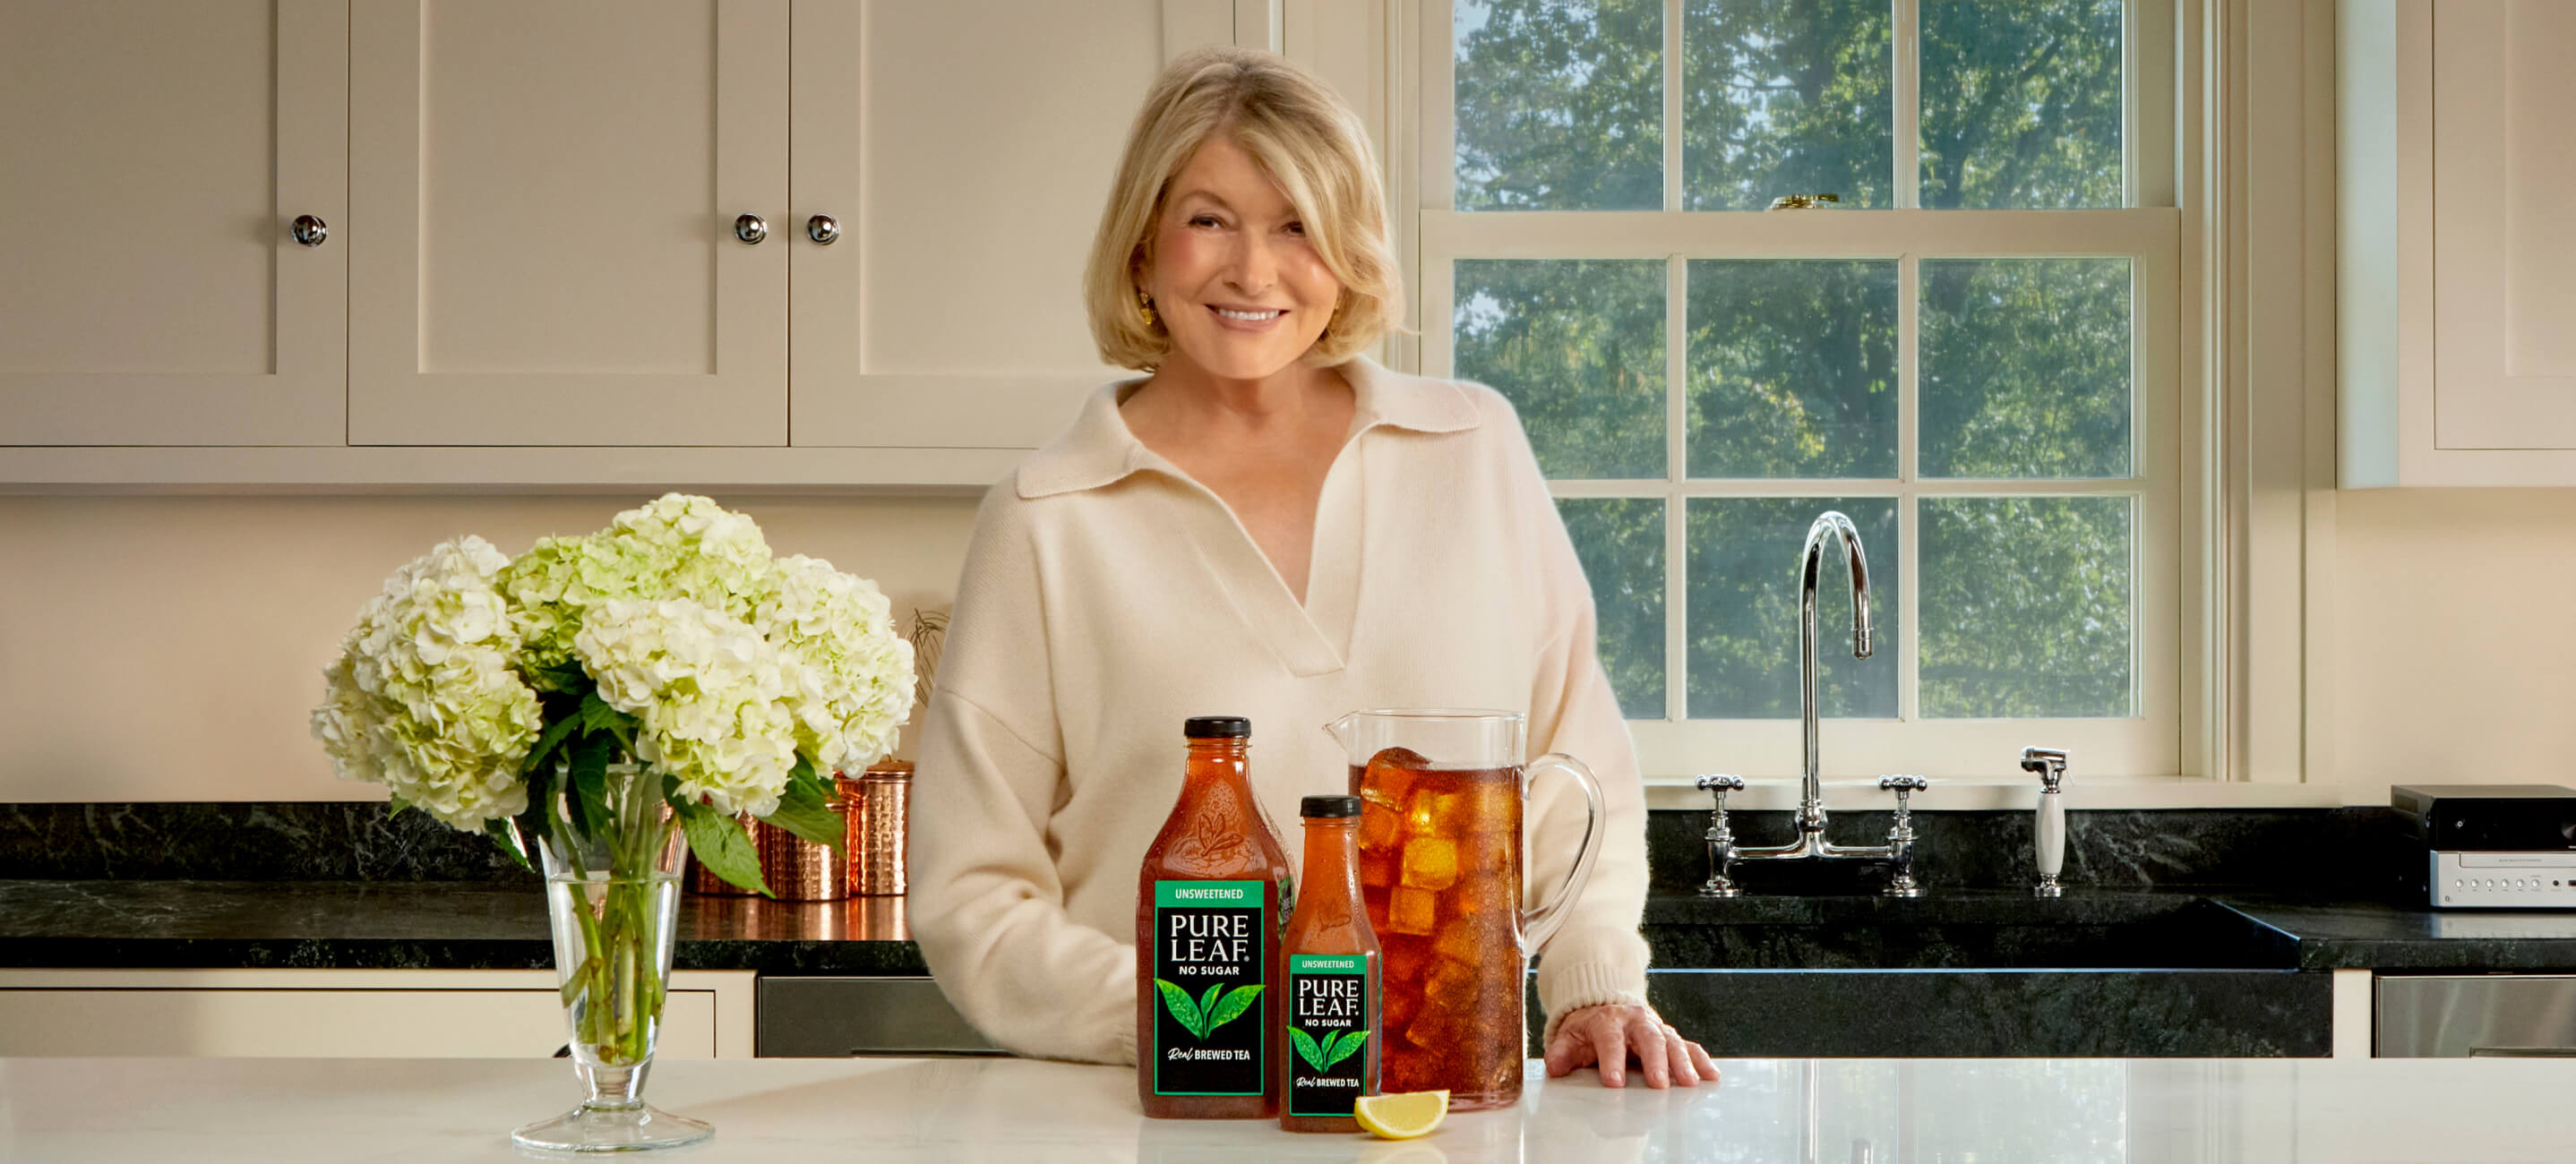 Martha Stewart at a kitchen counter with 2 Pure Leaf bottles and a Pitcher of Pure Leaf Iced Tea.